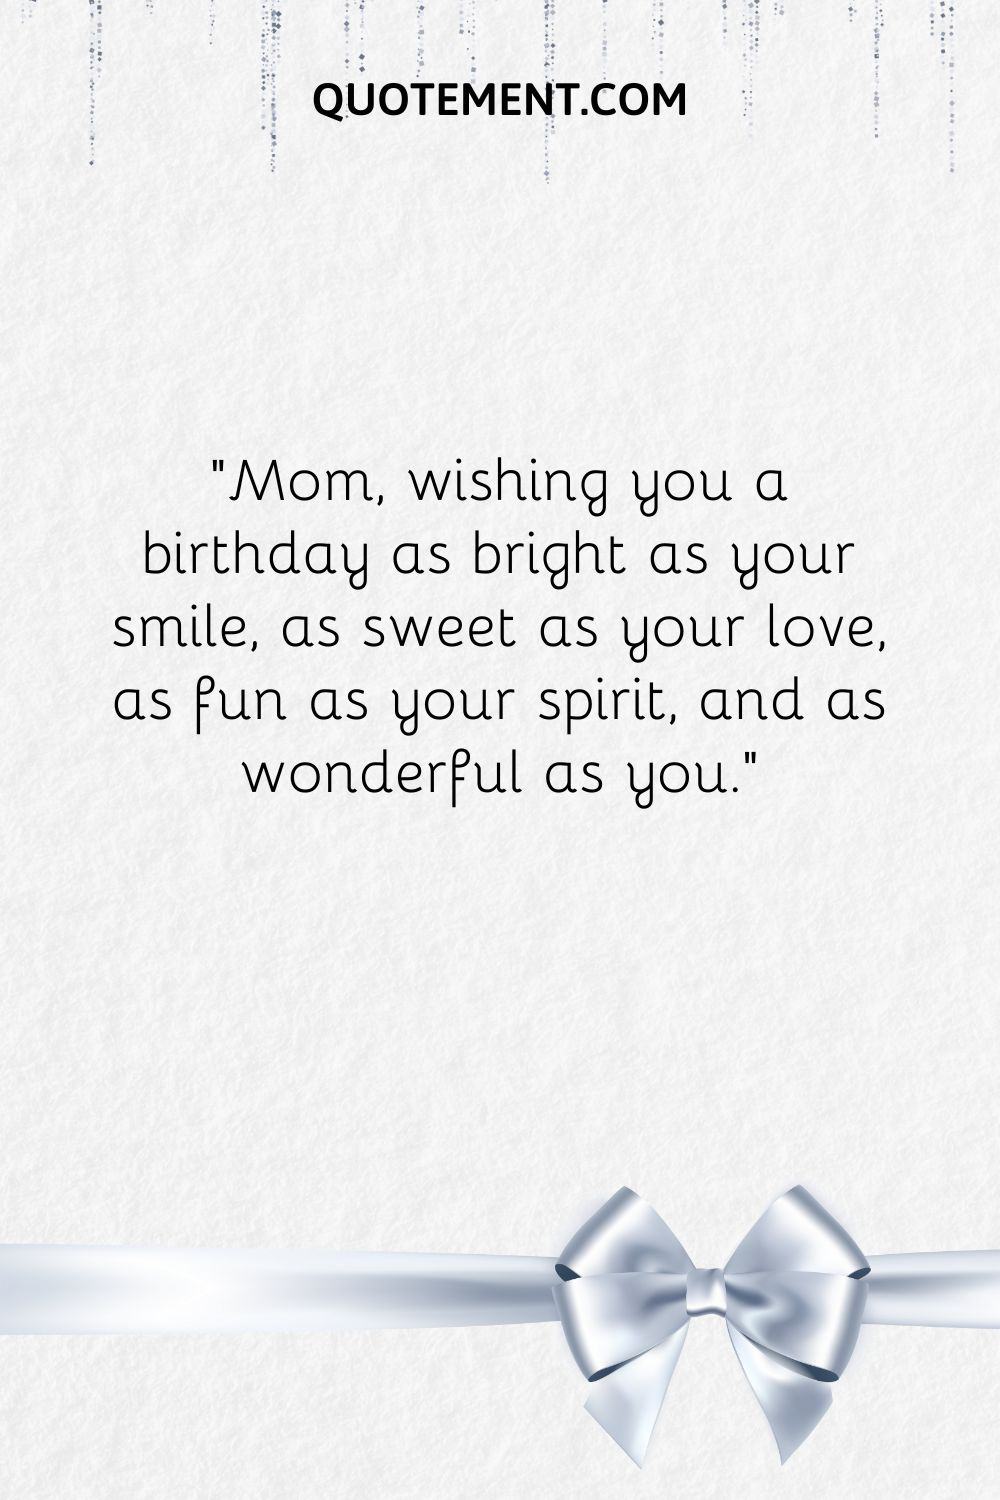 Mom, wishing you a birthday as bright as your smile, as sweet as your love, as fun as your spirit, and as wonderful as you